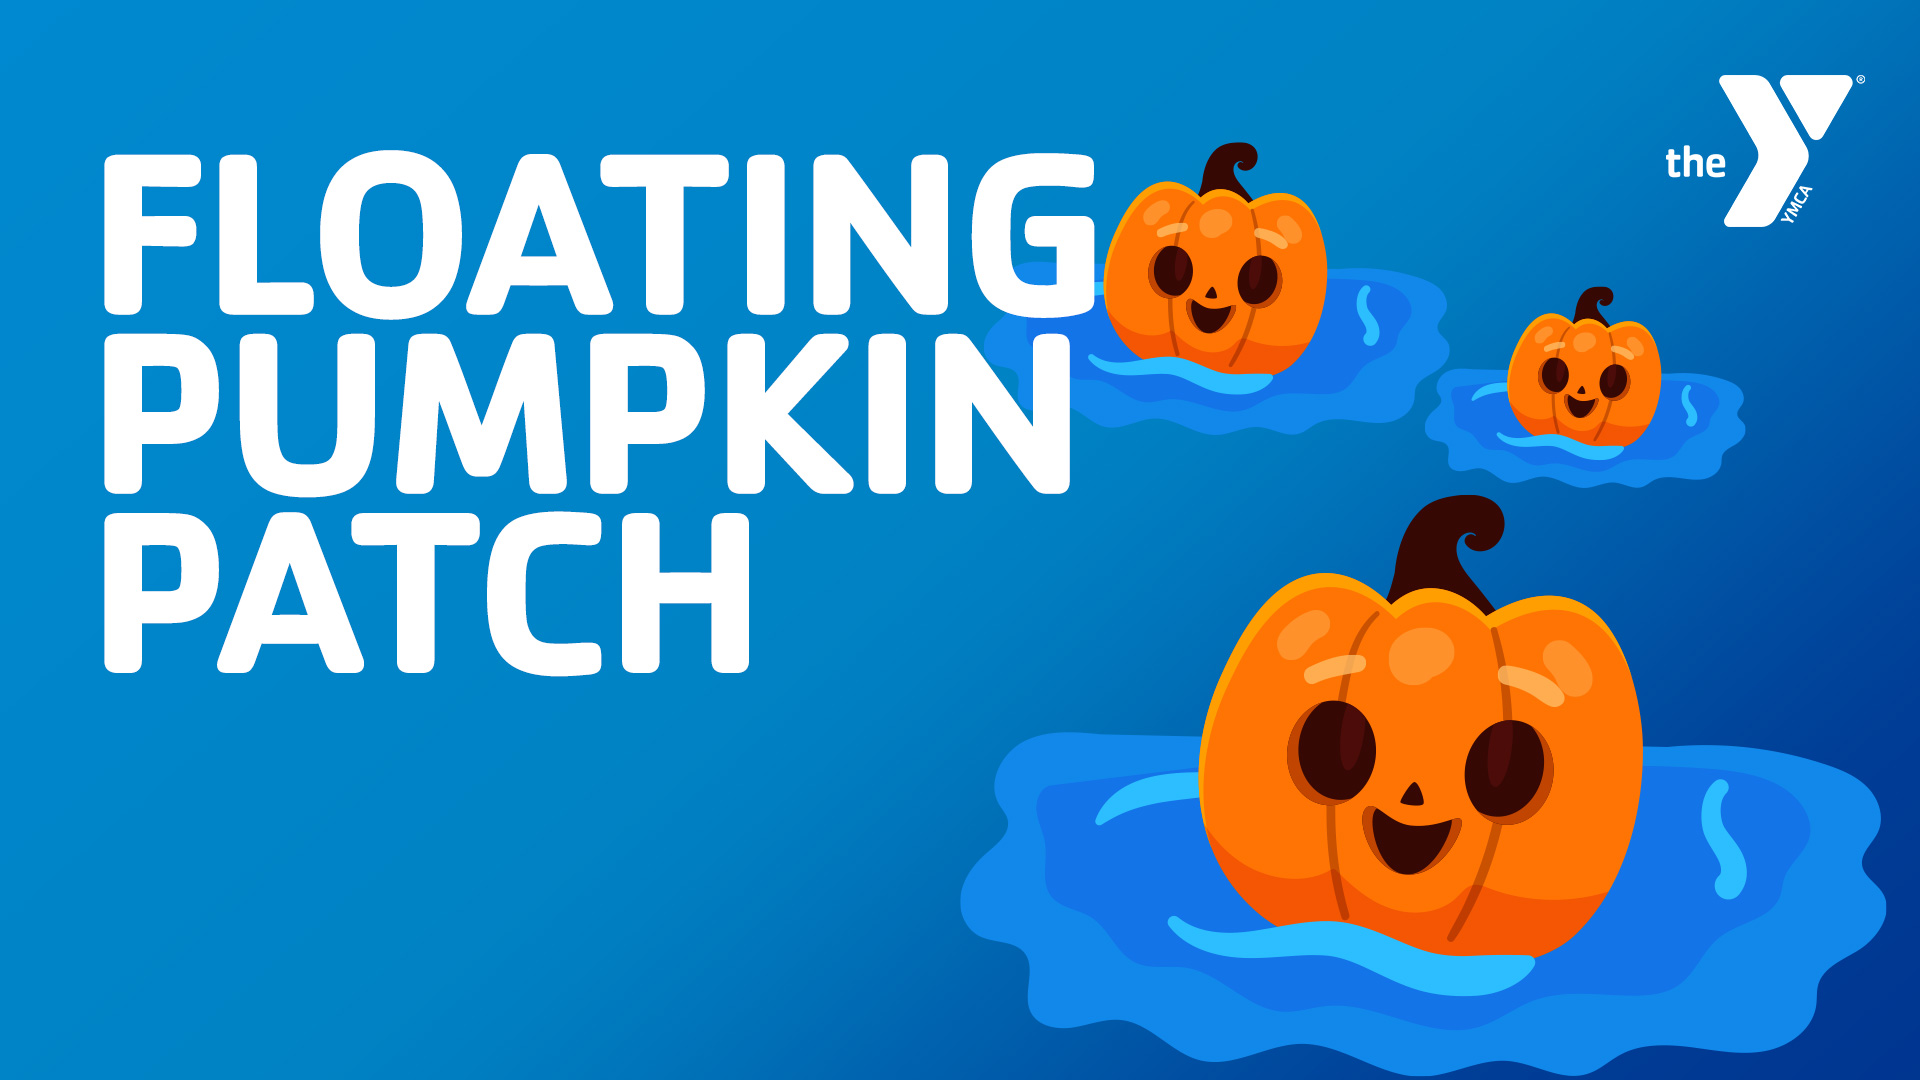 Featured image for “Floating Pumpkin Patch”